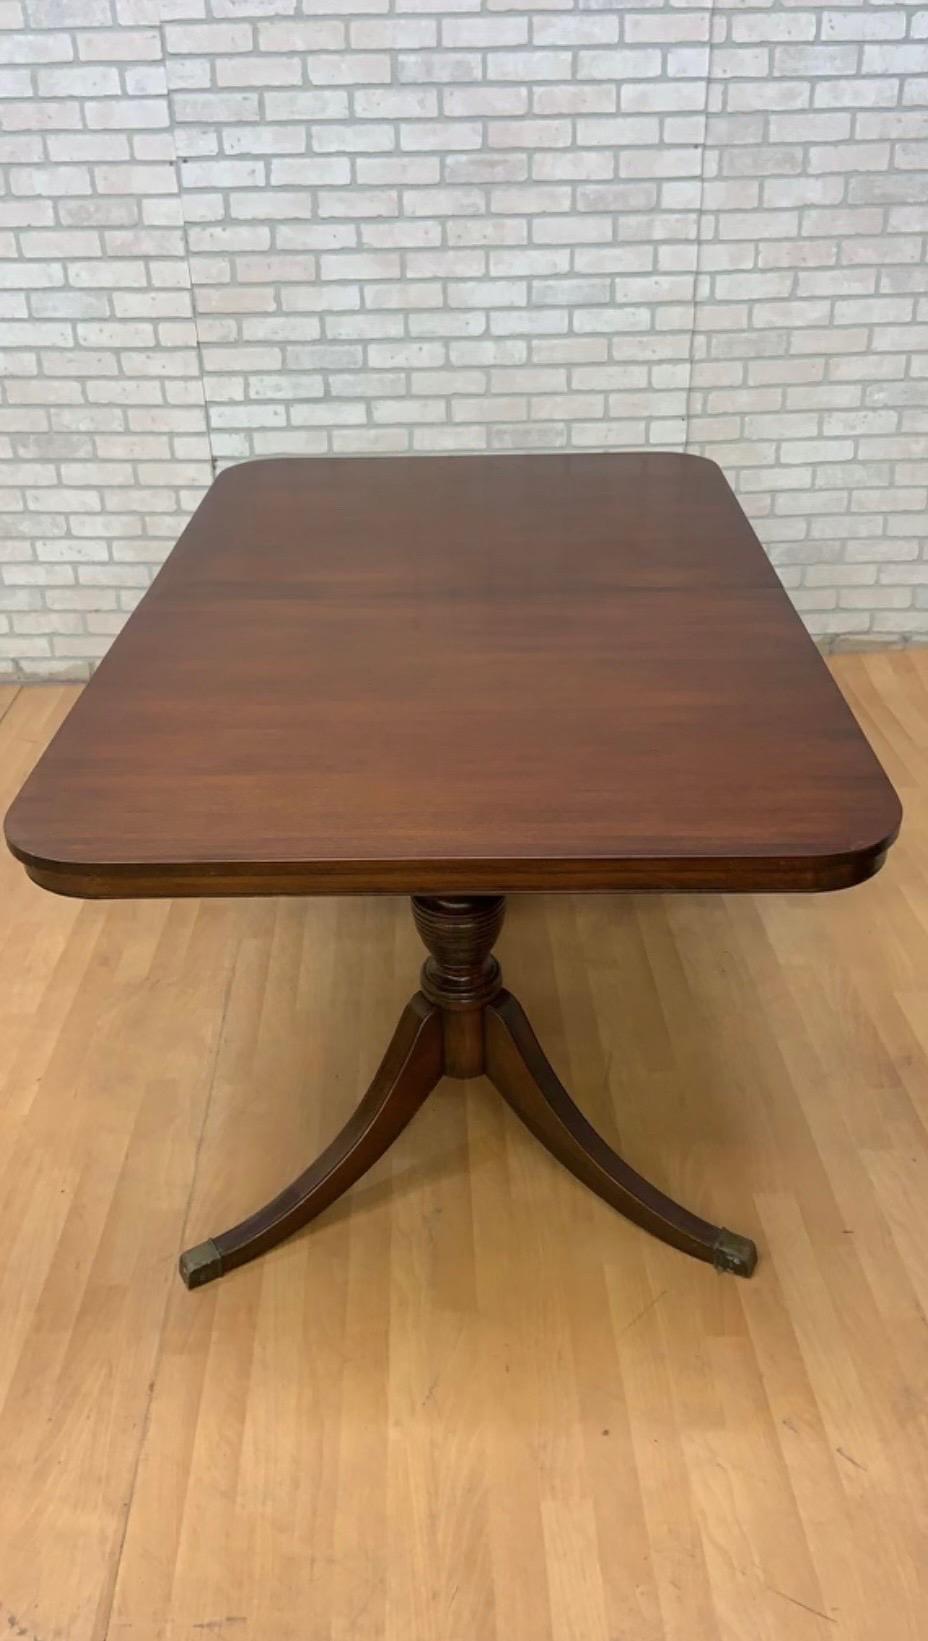 Antique Regency Duncan Phyfe Style Mahogany Dining Table w/ 3 Leaves For Sale 2